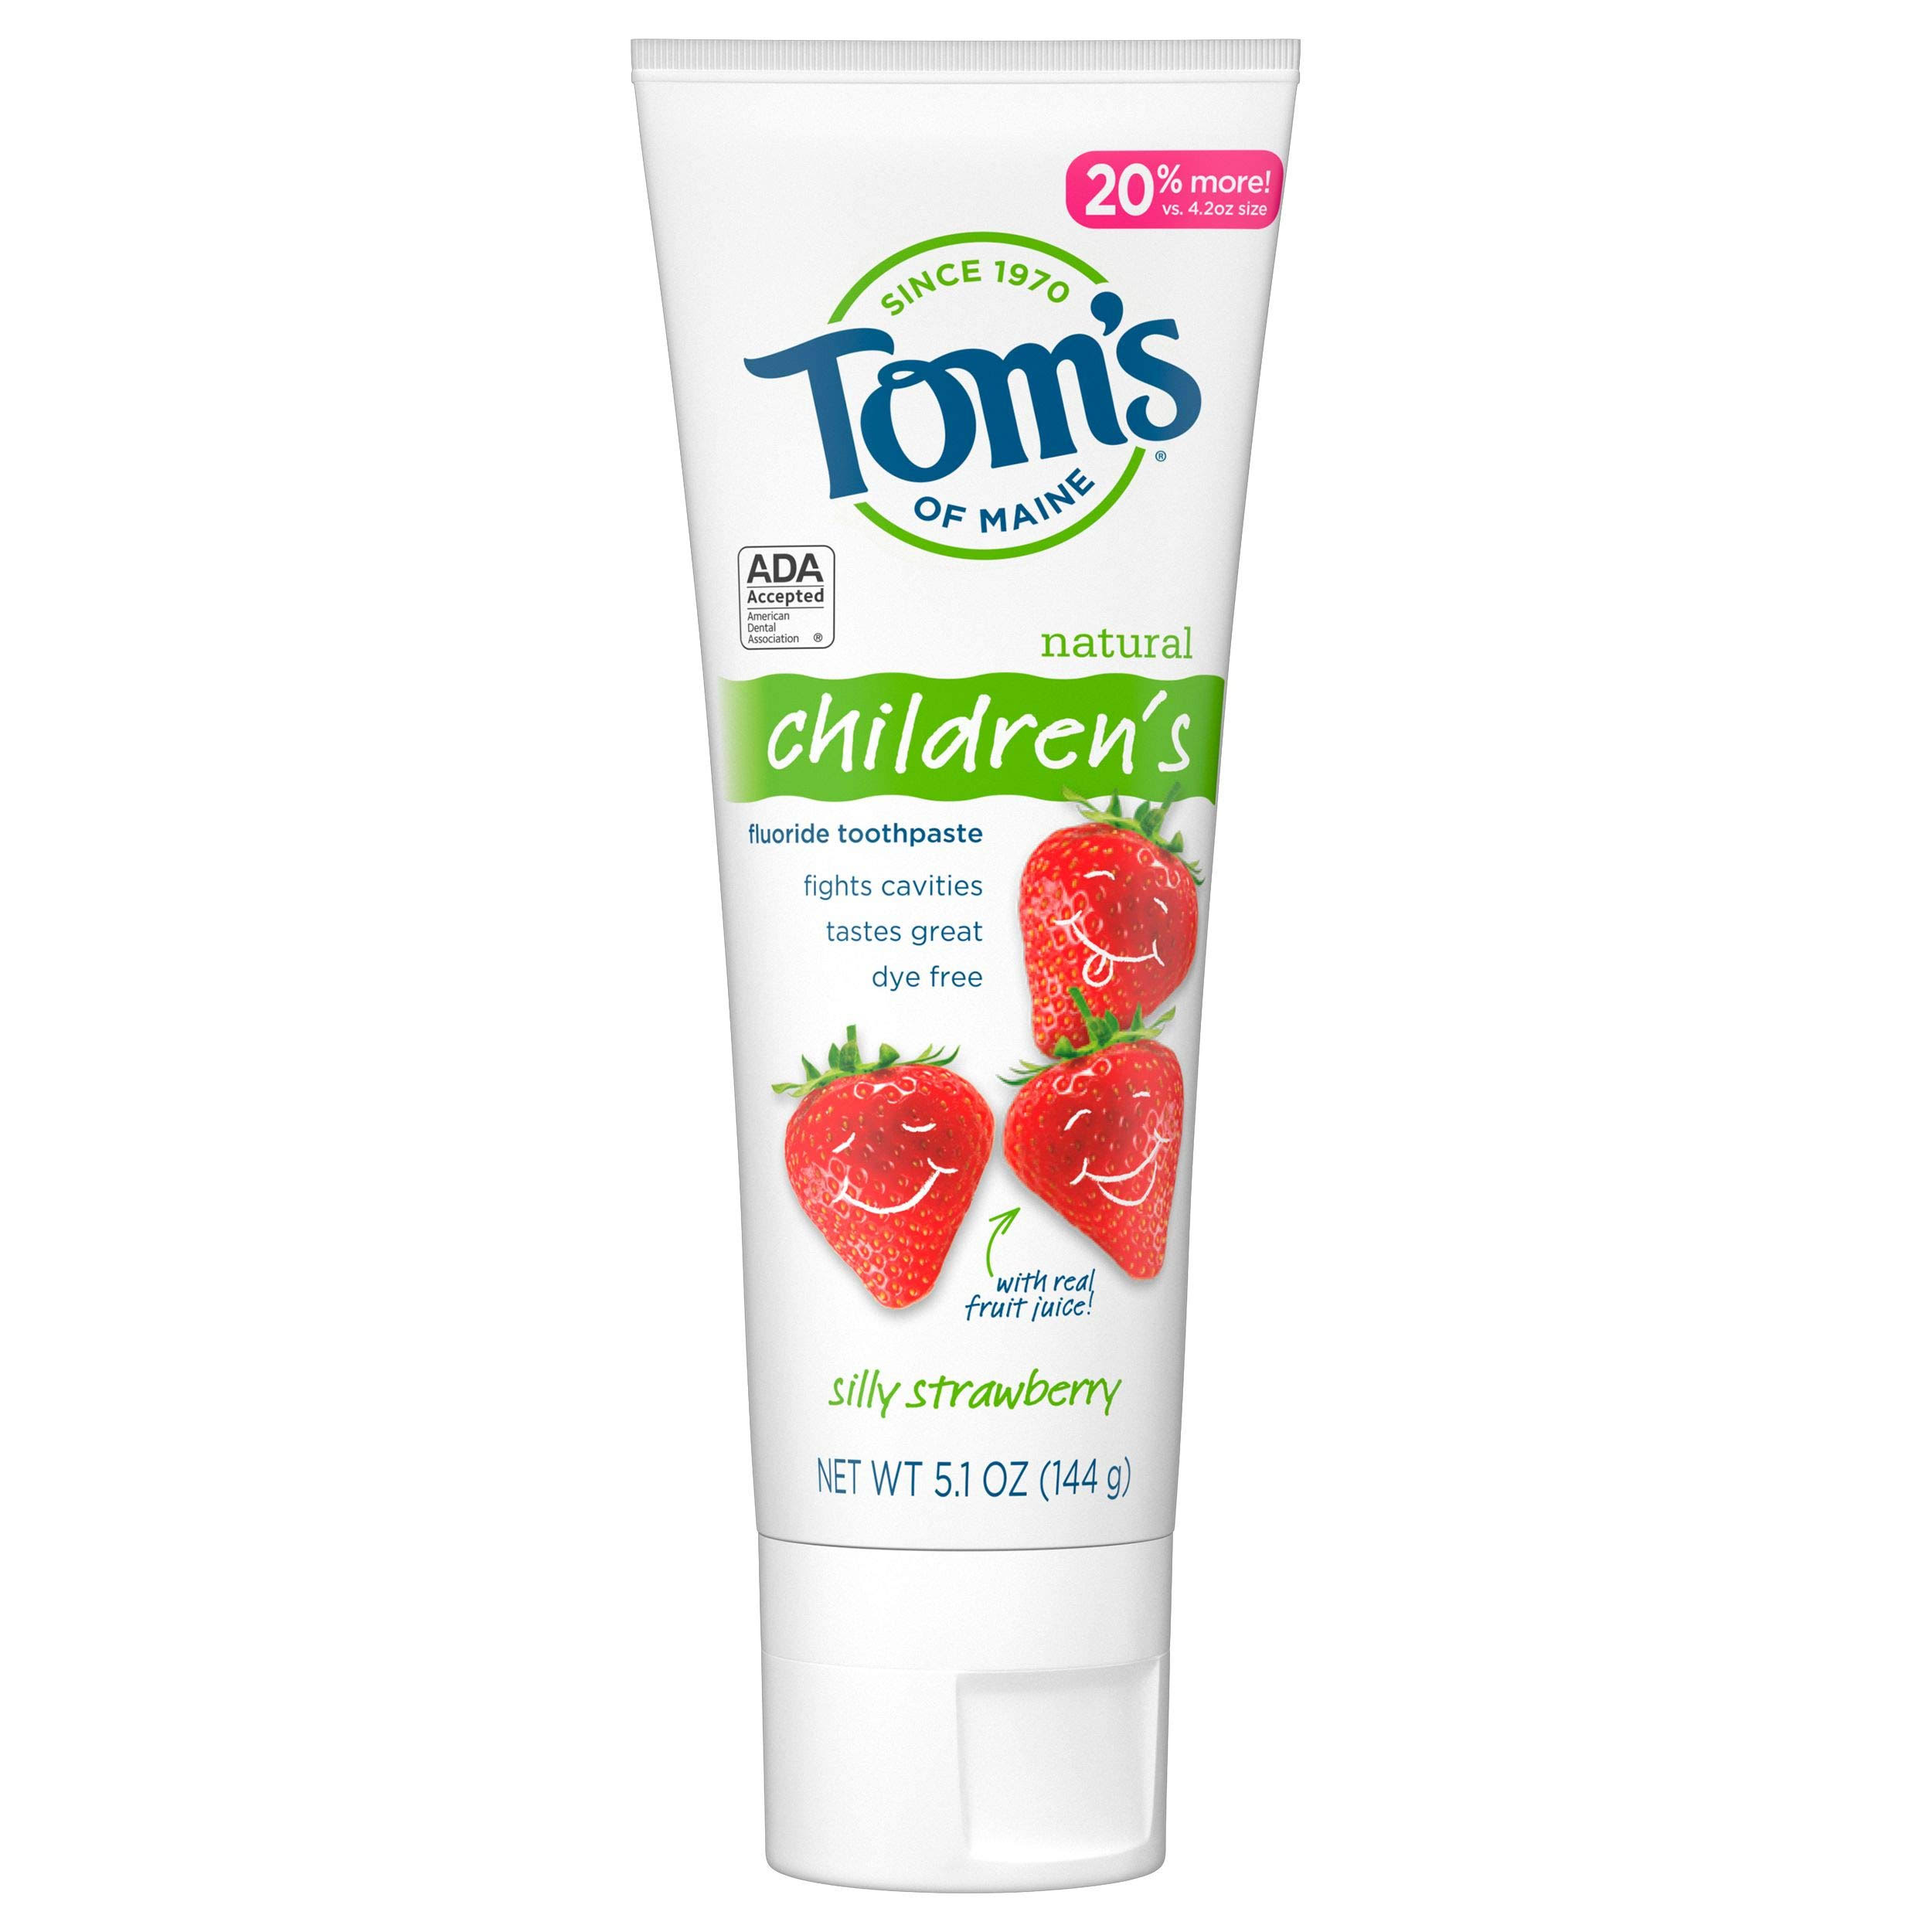 Tom's of maine silly strawberry fluoride toothpaste, 5.1 oz